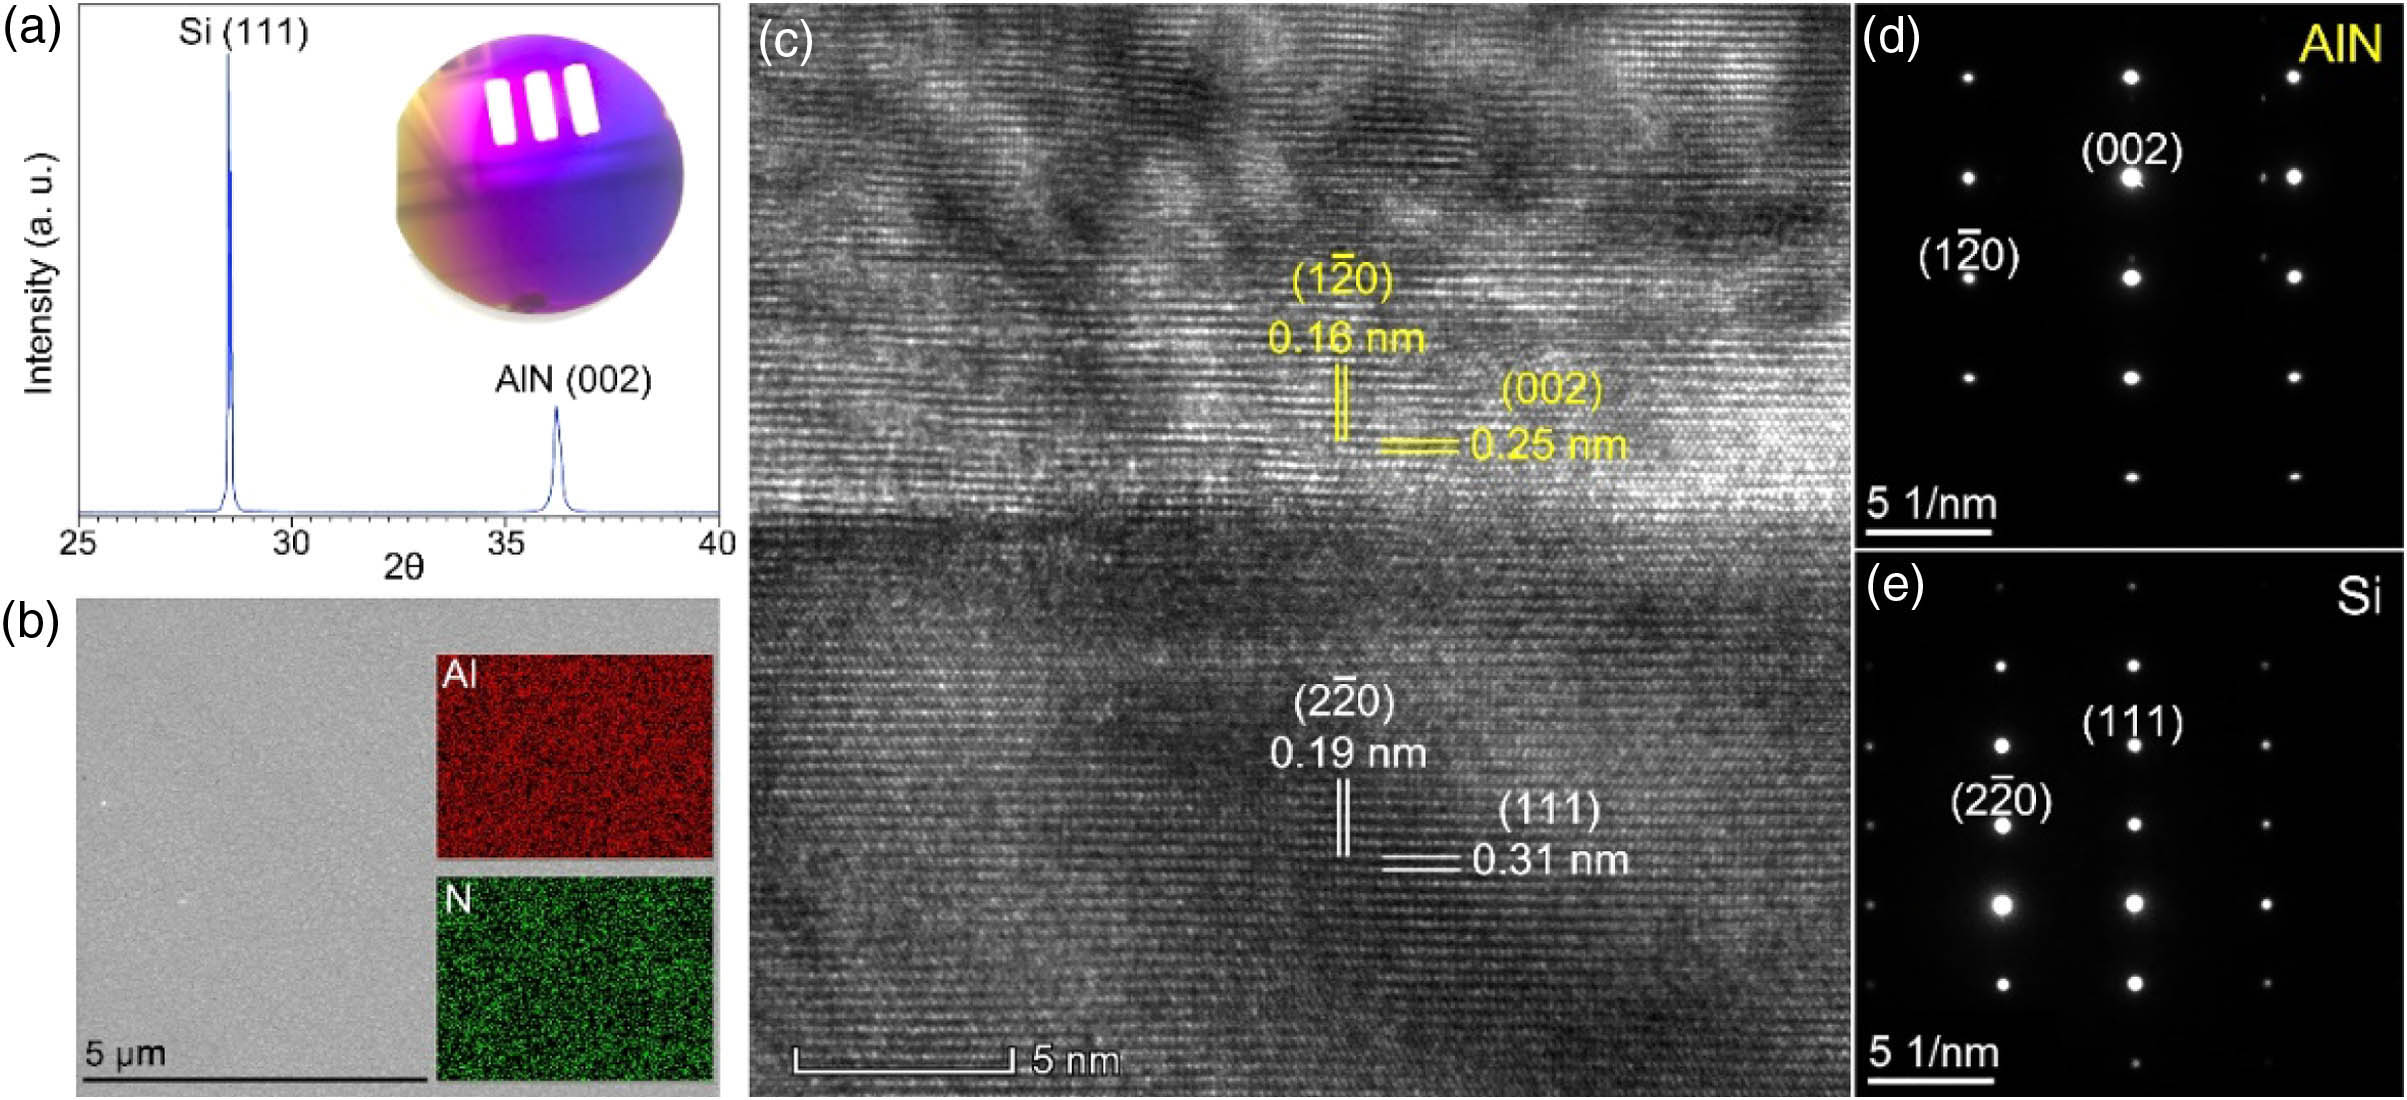 Material characterizations of AlN/Si heterostructure. (a) XRD diffraction pattern of the as-grown AlN film on a p-Si substrate. Inset shows the sample. (b) Respective elemental mapping image of Al and N on the surface of the AlN film; (c) cross-sectional TEM image of (001) AlN films on a (111) Si substrate obtained under a near [−2–10] AlN zone axis. The spacing of the atomic layer measured in the image agrees well with the standard lattice constants of Si and AlN crystals. Selected area diffraction pattern of (d) AlN and (e) Si.